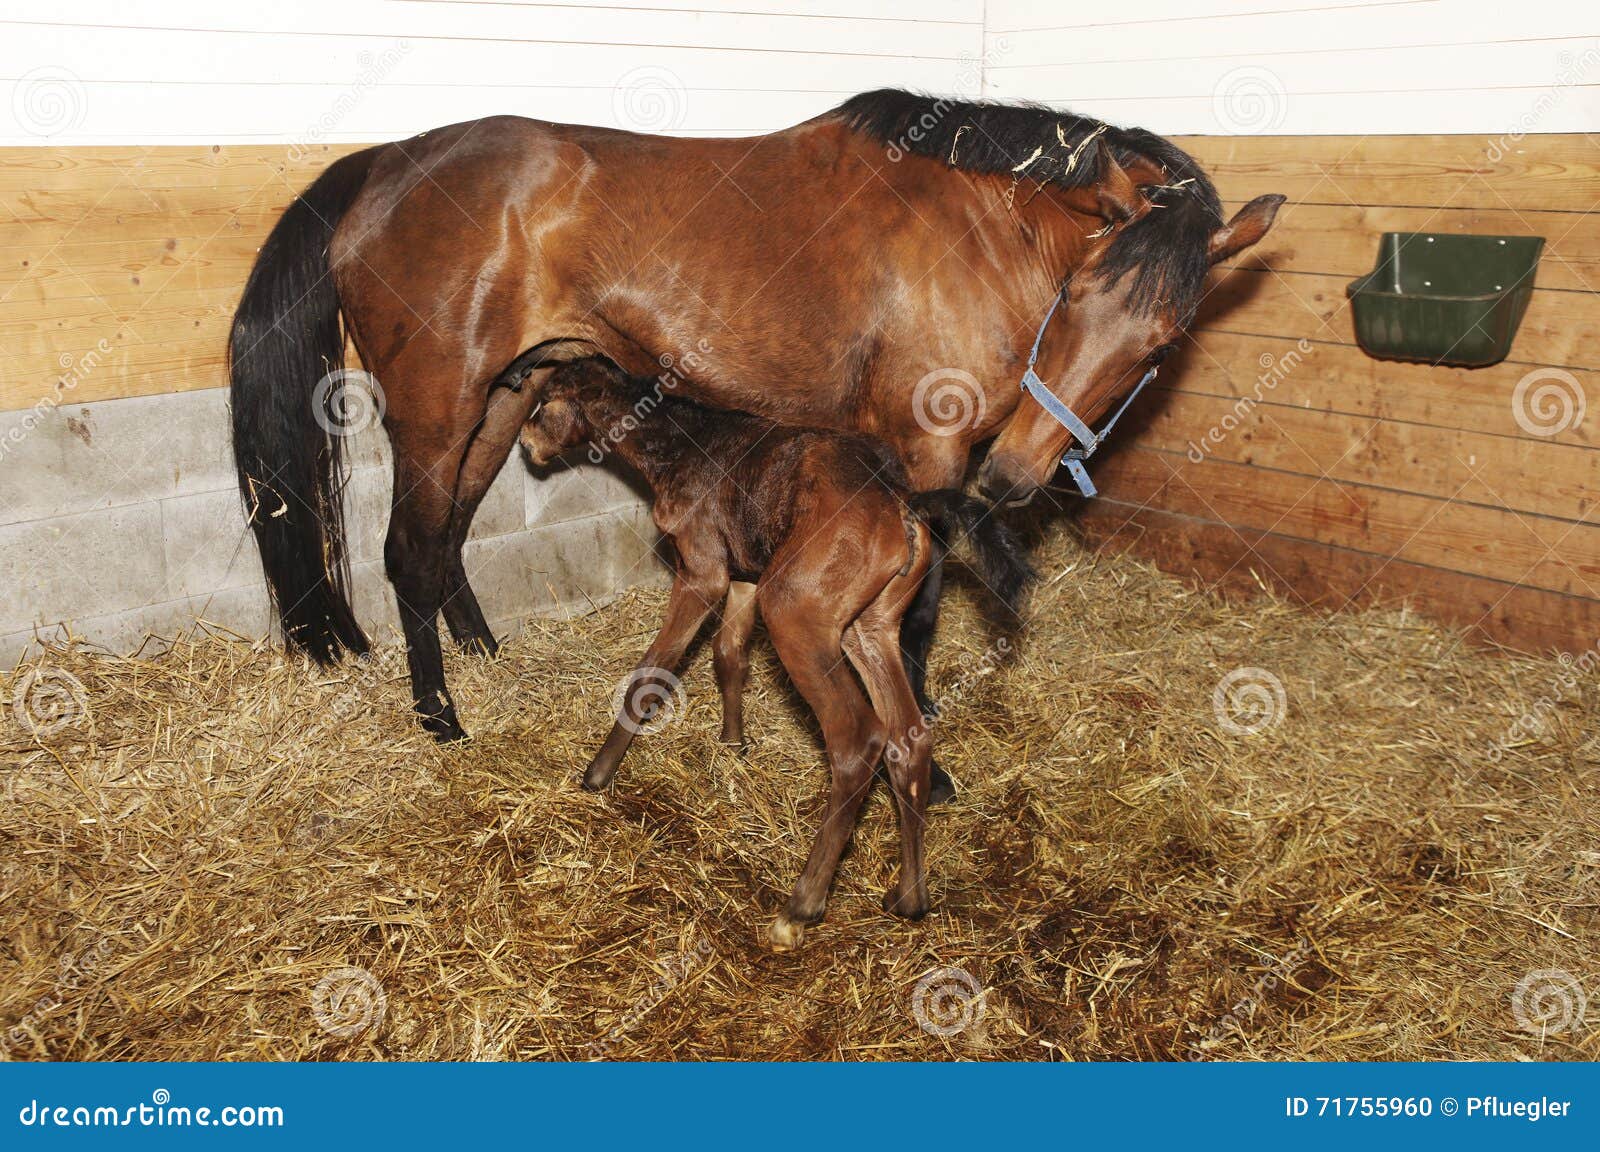 newborn foal trying to drink